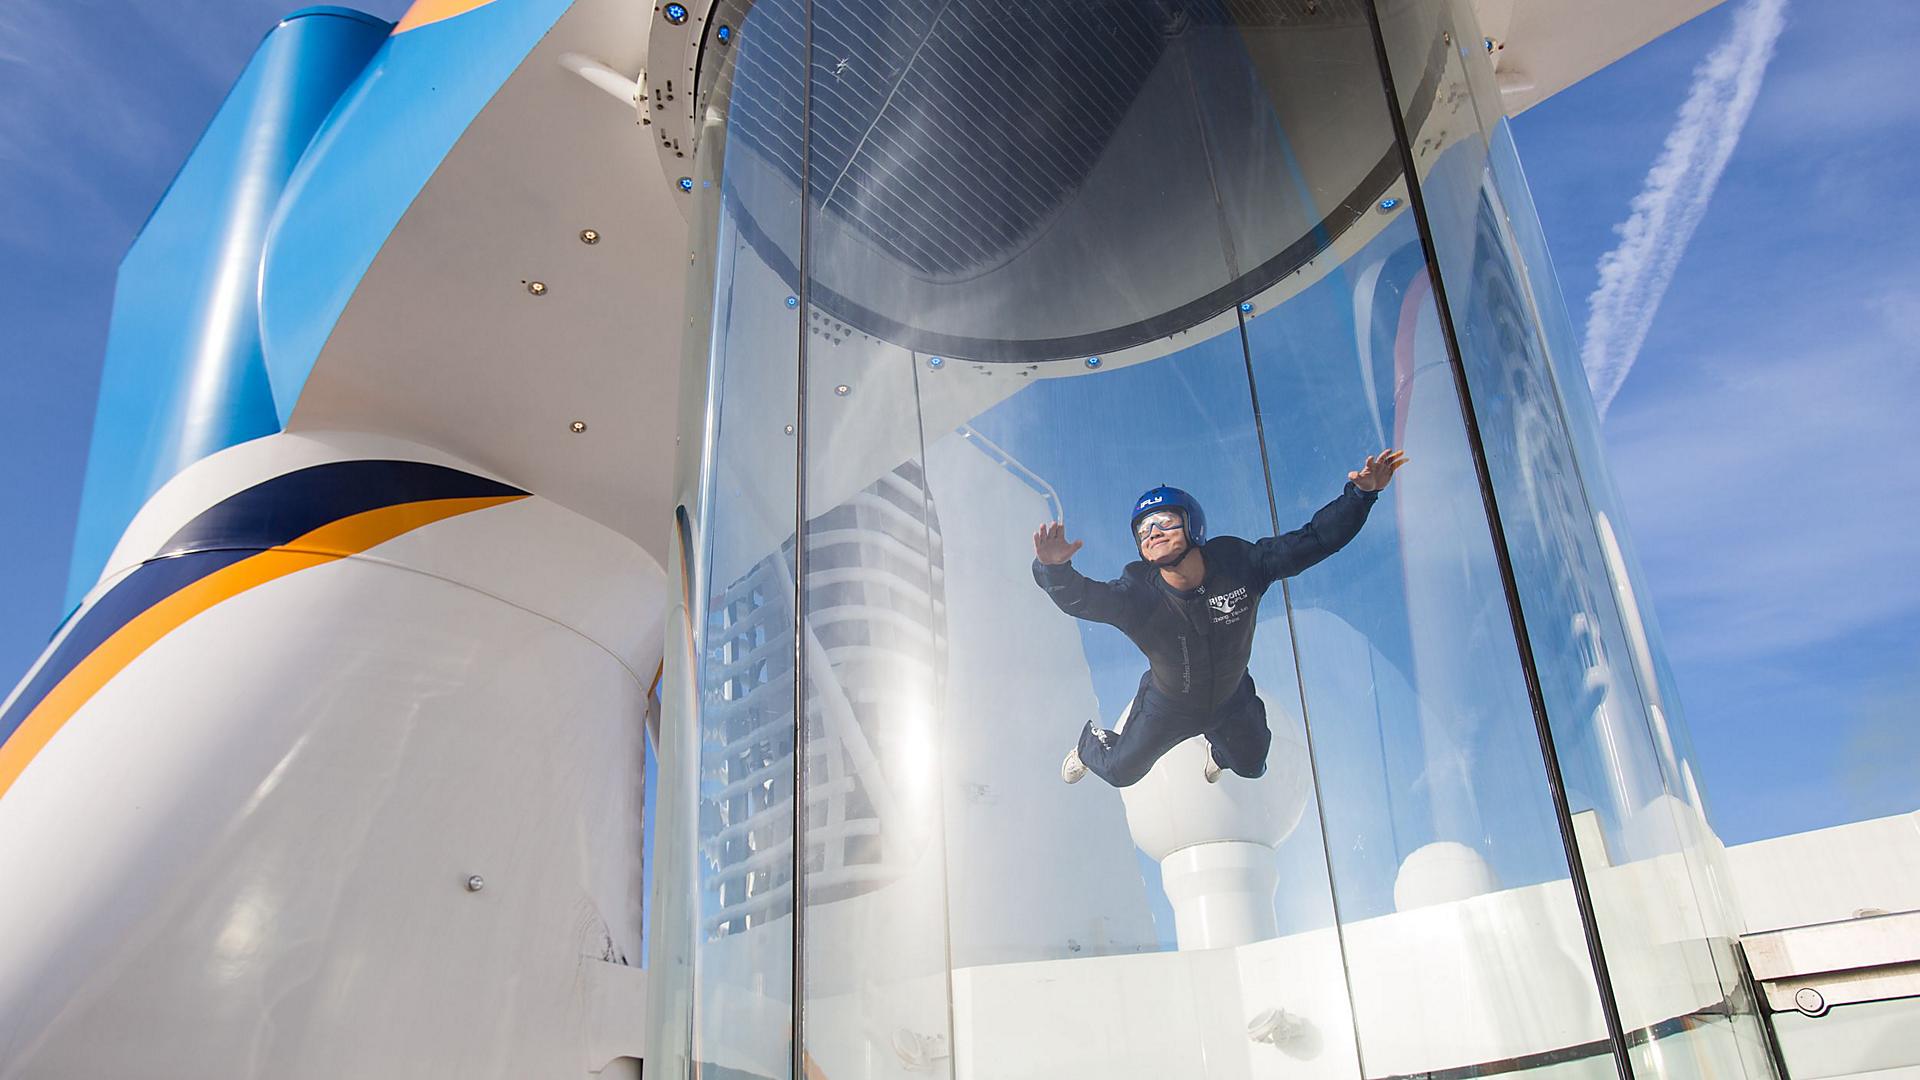 ripcord-by-iFly-instructor-activity